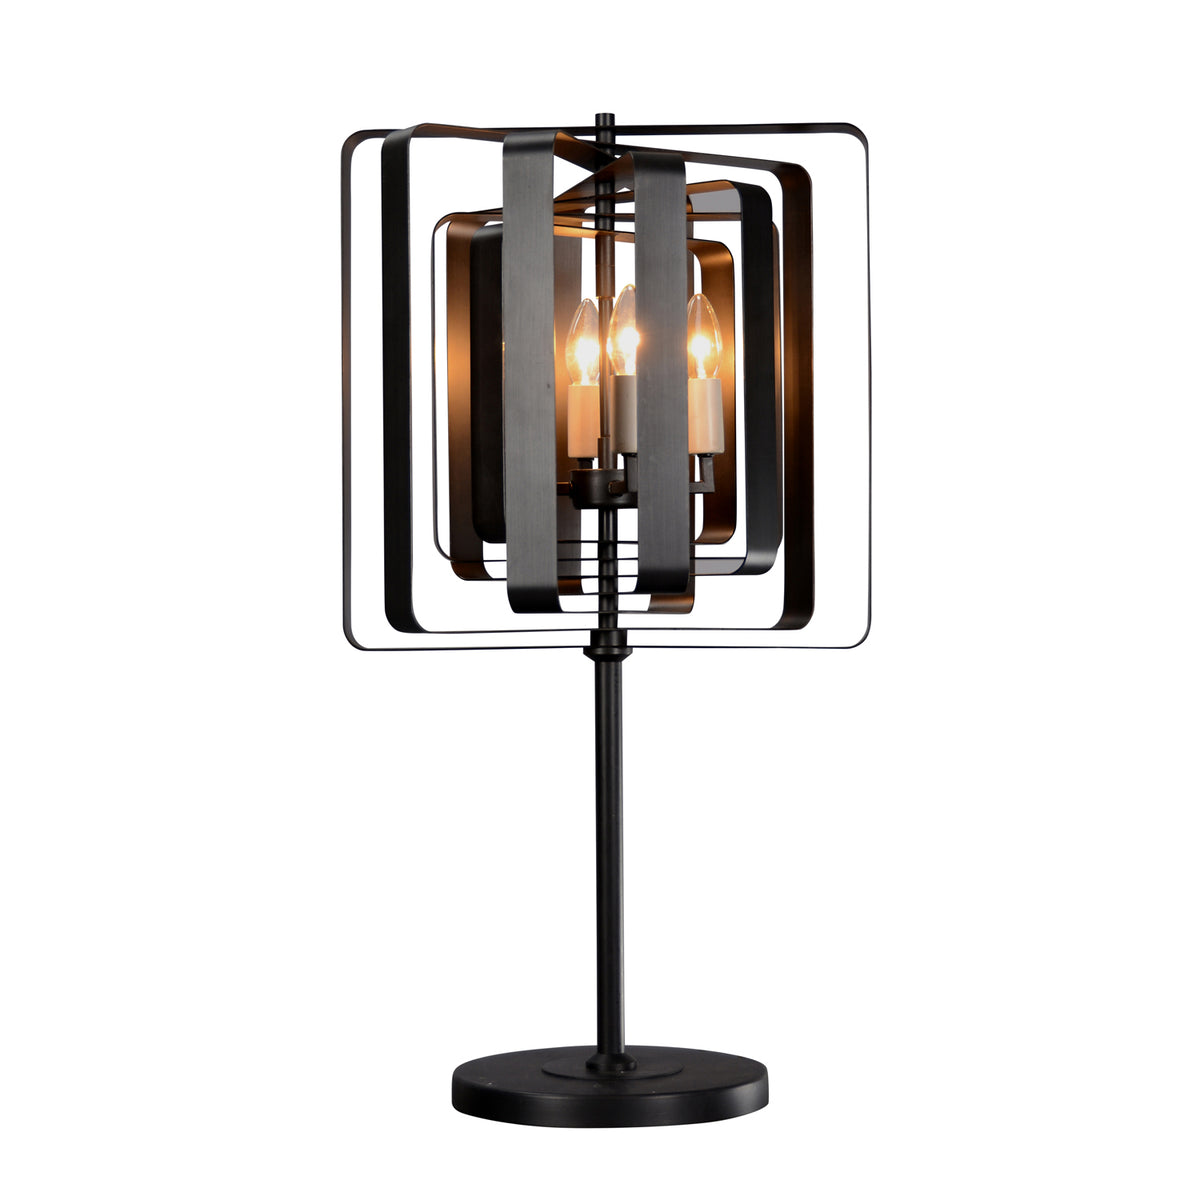 "Torcia" 4-Bulb Candle-Style Table Lamp